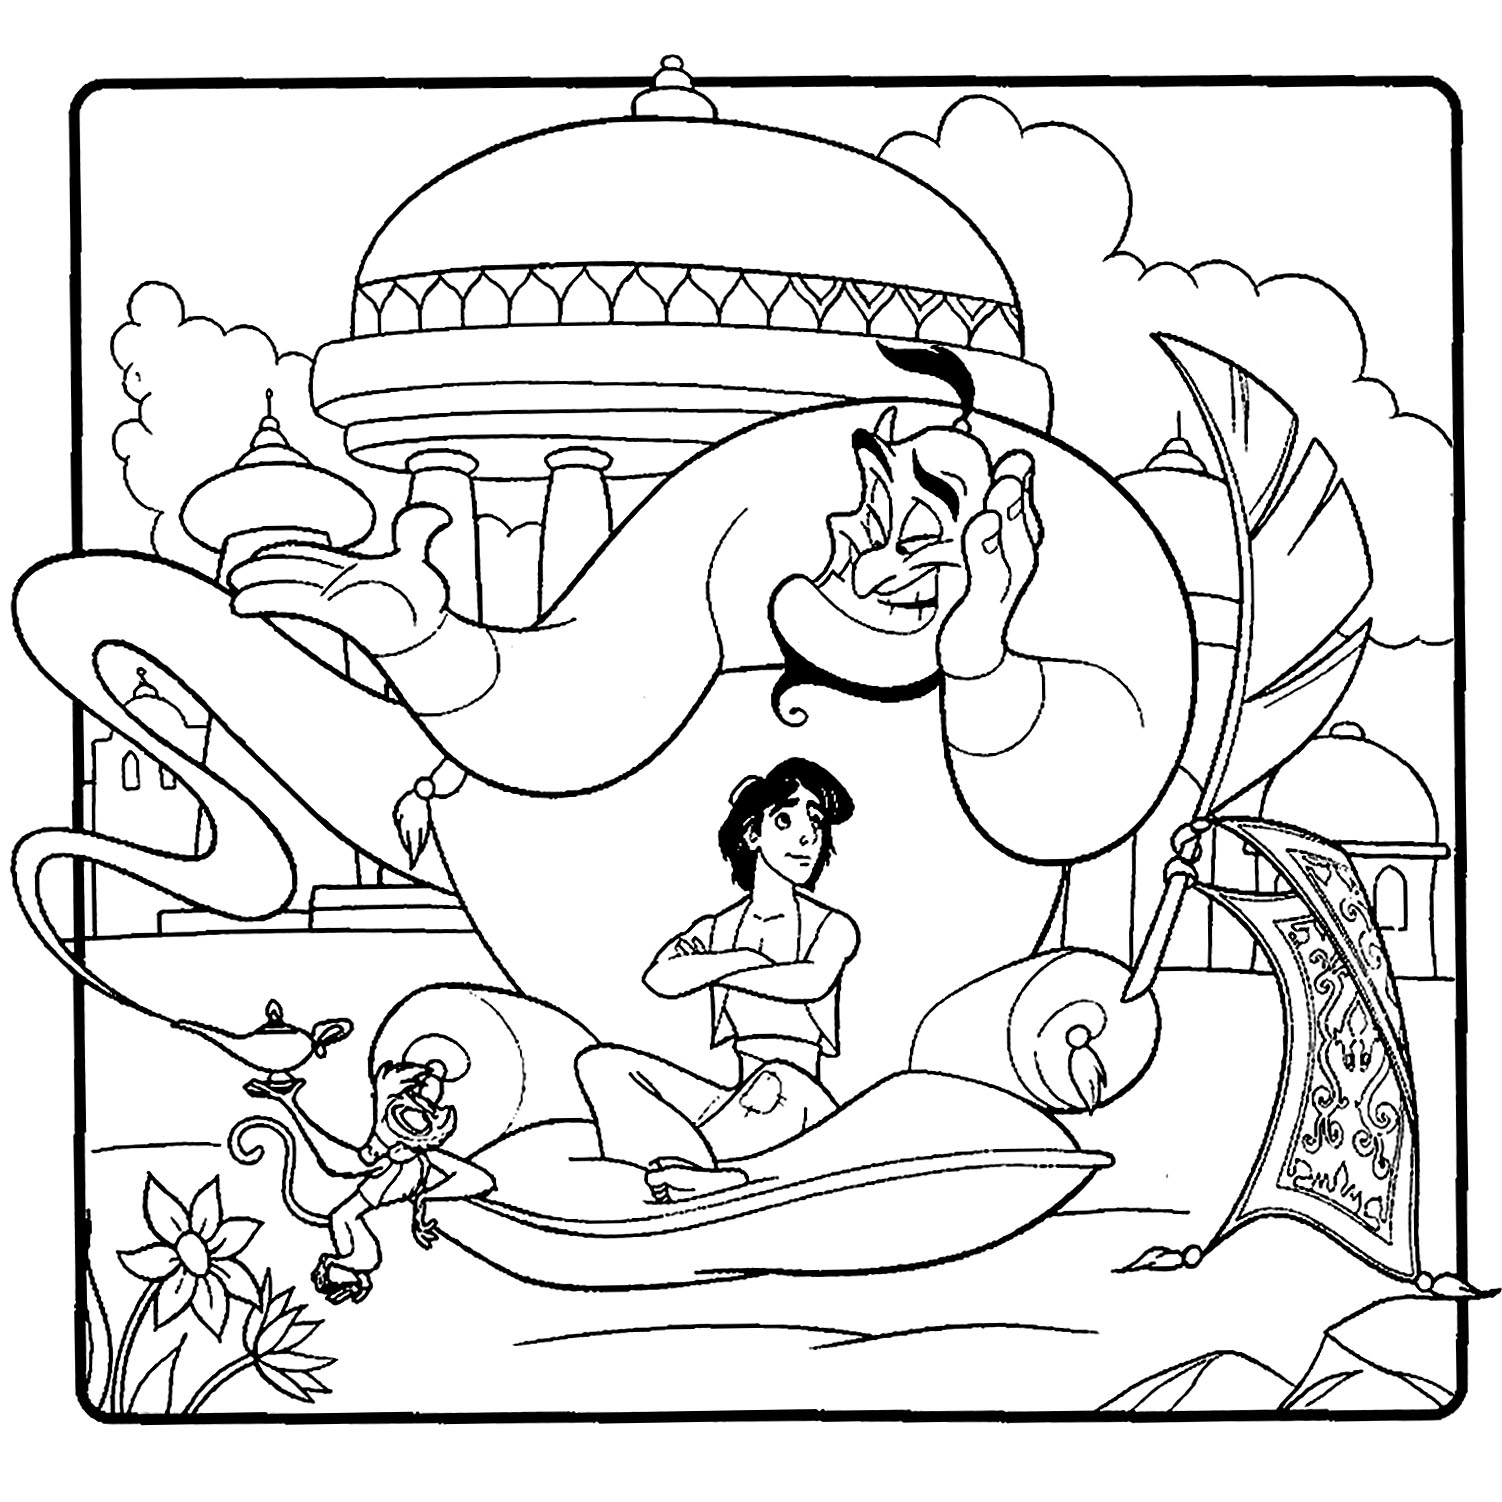 Genie Protect Aladdin Coloring Pages   Coloring Cool